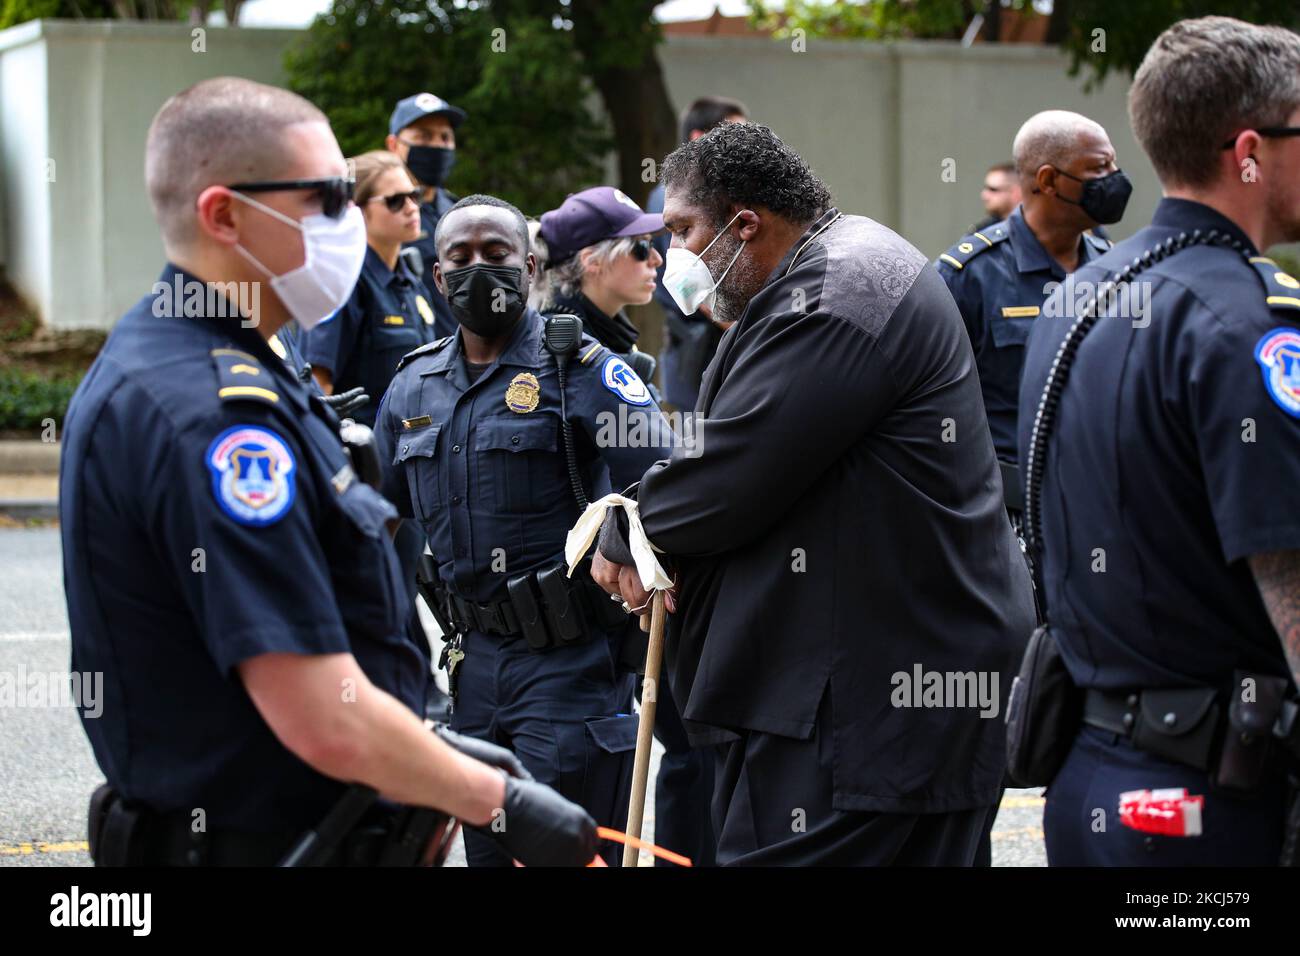 Reverend William Barber II is arrested by U.S. Capitol Police during the Poor People's Campaign Moral Monday demonstration and civil disobedience action near the U.S. Capitol in Washington, D.C. on August 2, 2021 (Photo by Bryan Olin Dozier/NurPhoto) Stock Photo